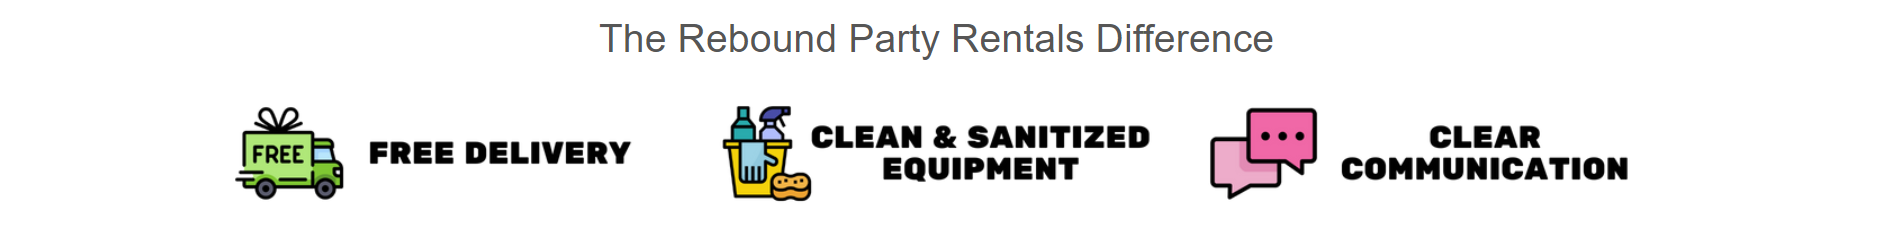 free delivery of clean and sanitized party rentals